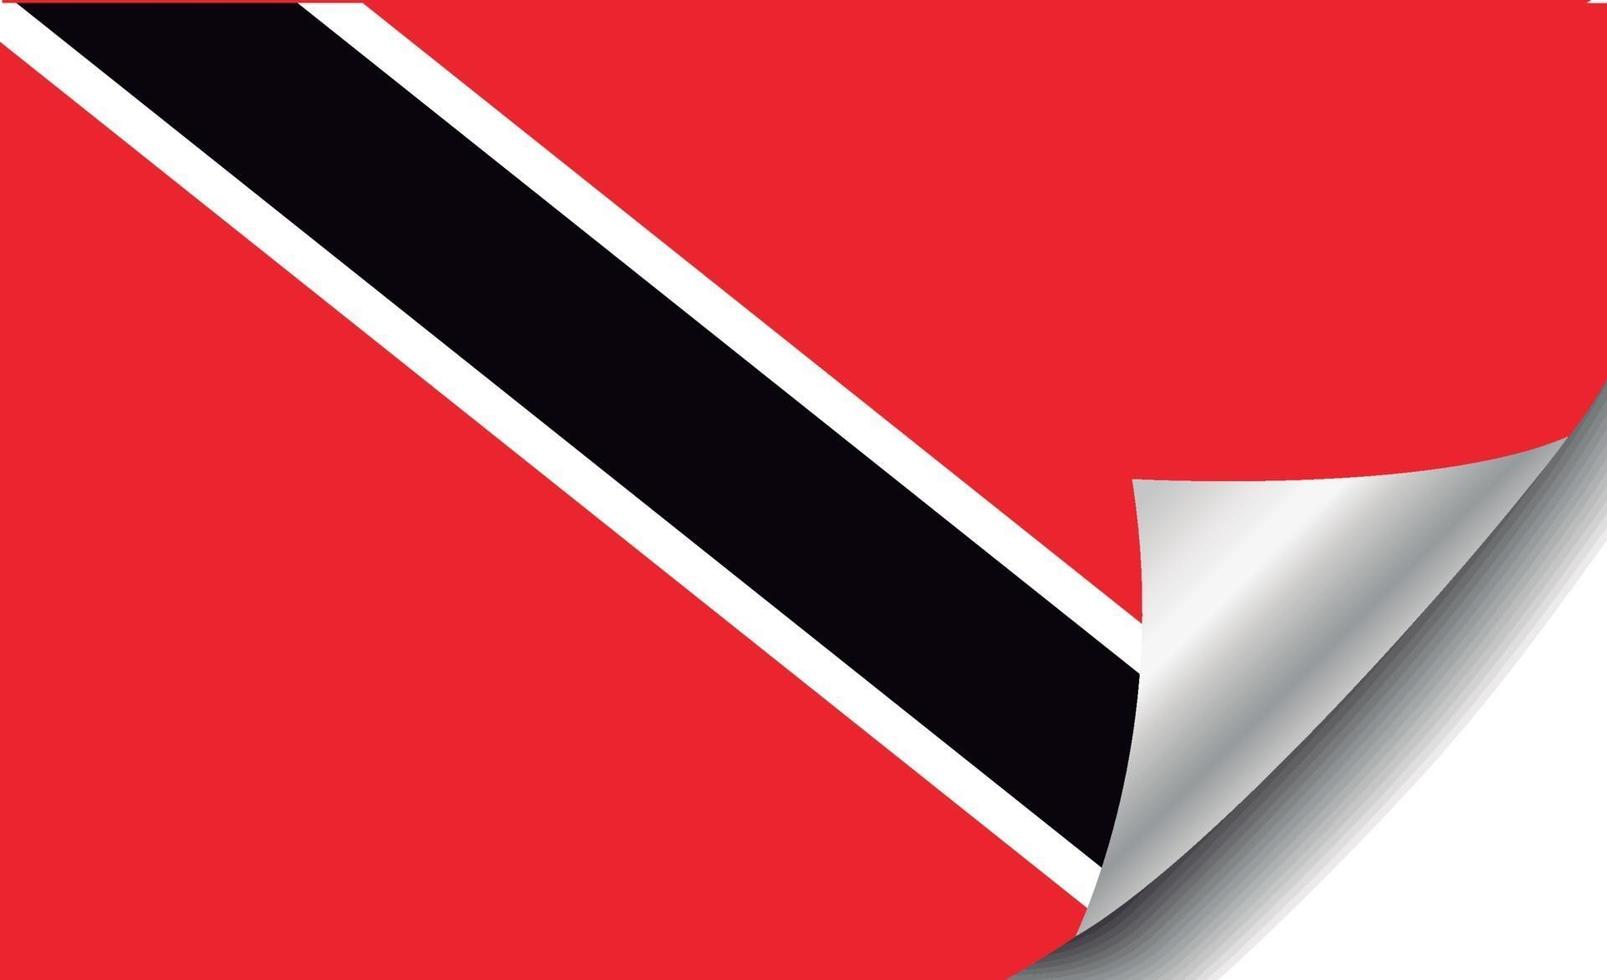 Trinidad and Tobago flag with curled corner vector